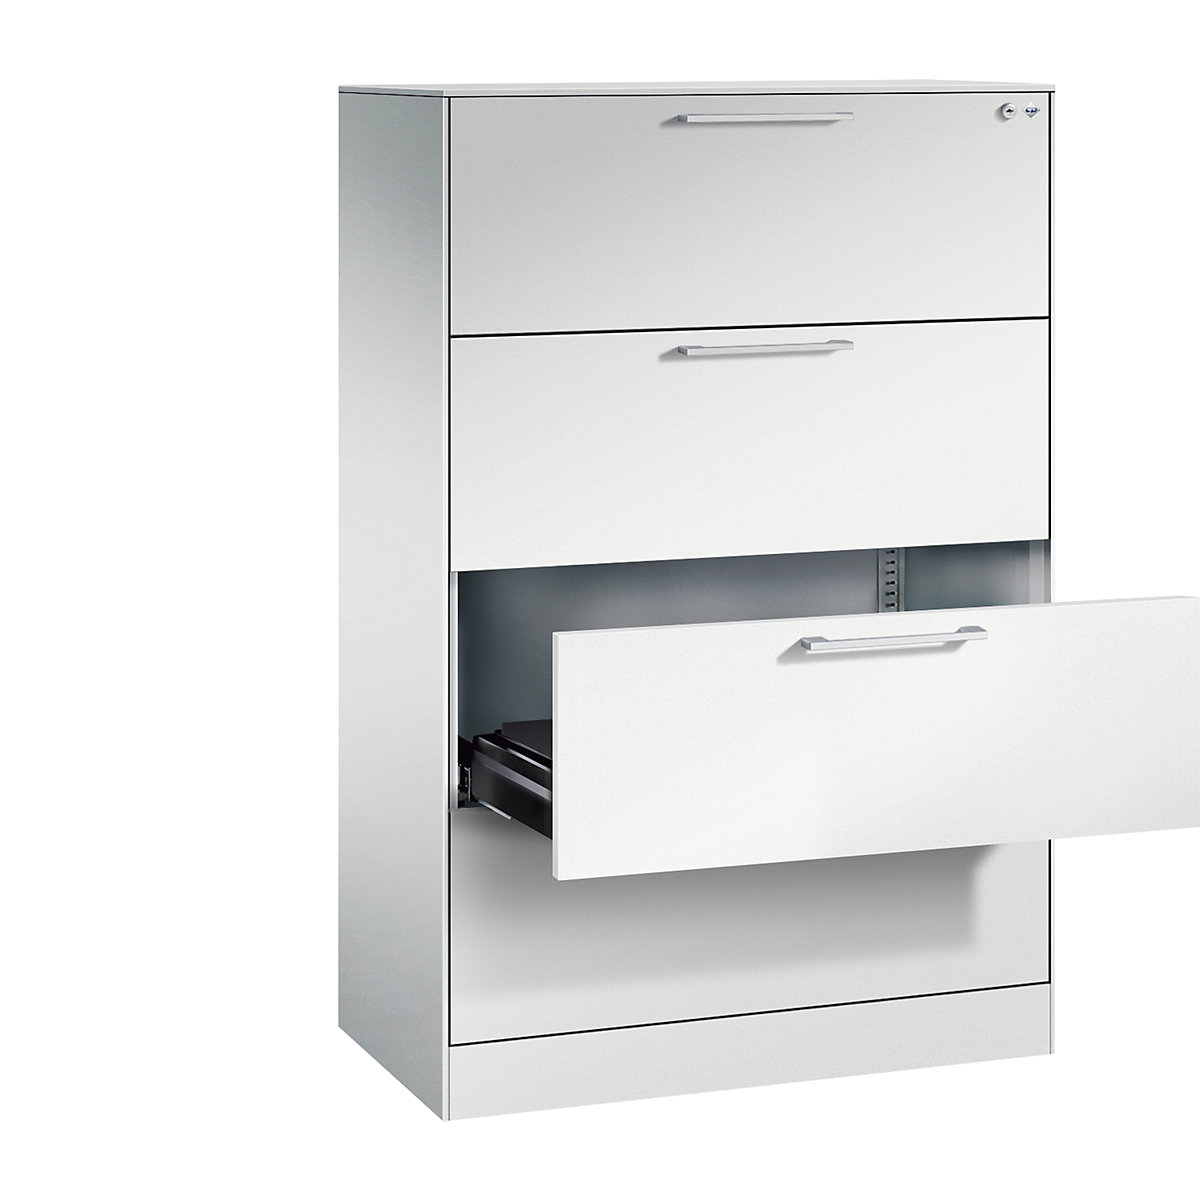 ASISTO card file cabinet – C+P, height 1292 mm, with 4 drawers, A4 landscape, light grey/light grey-18